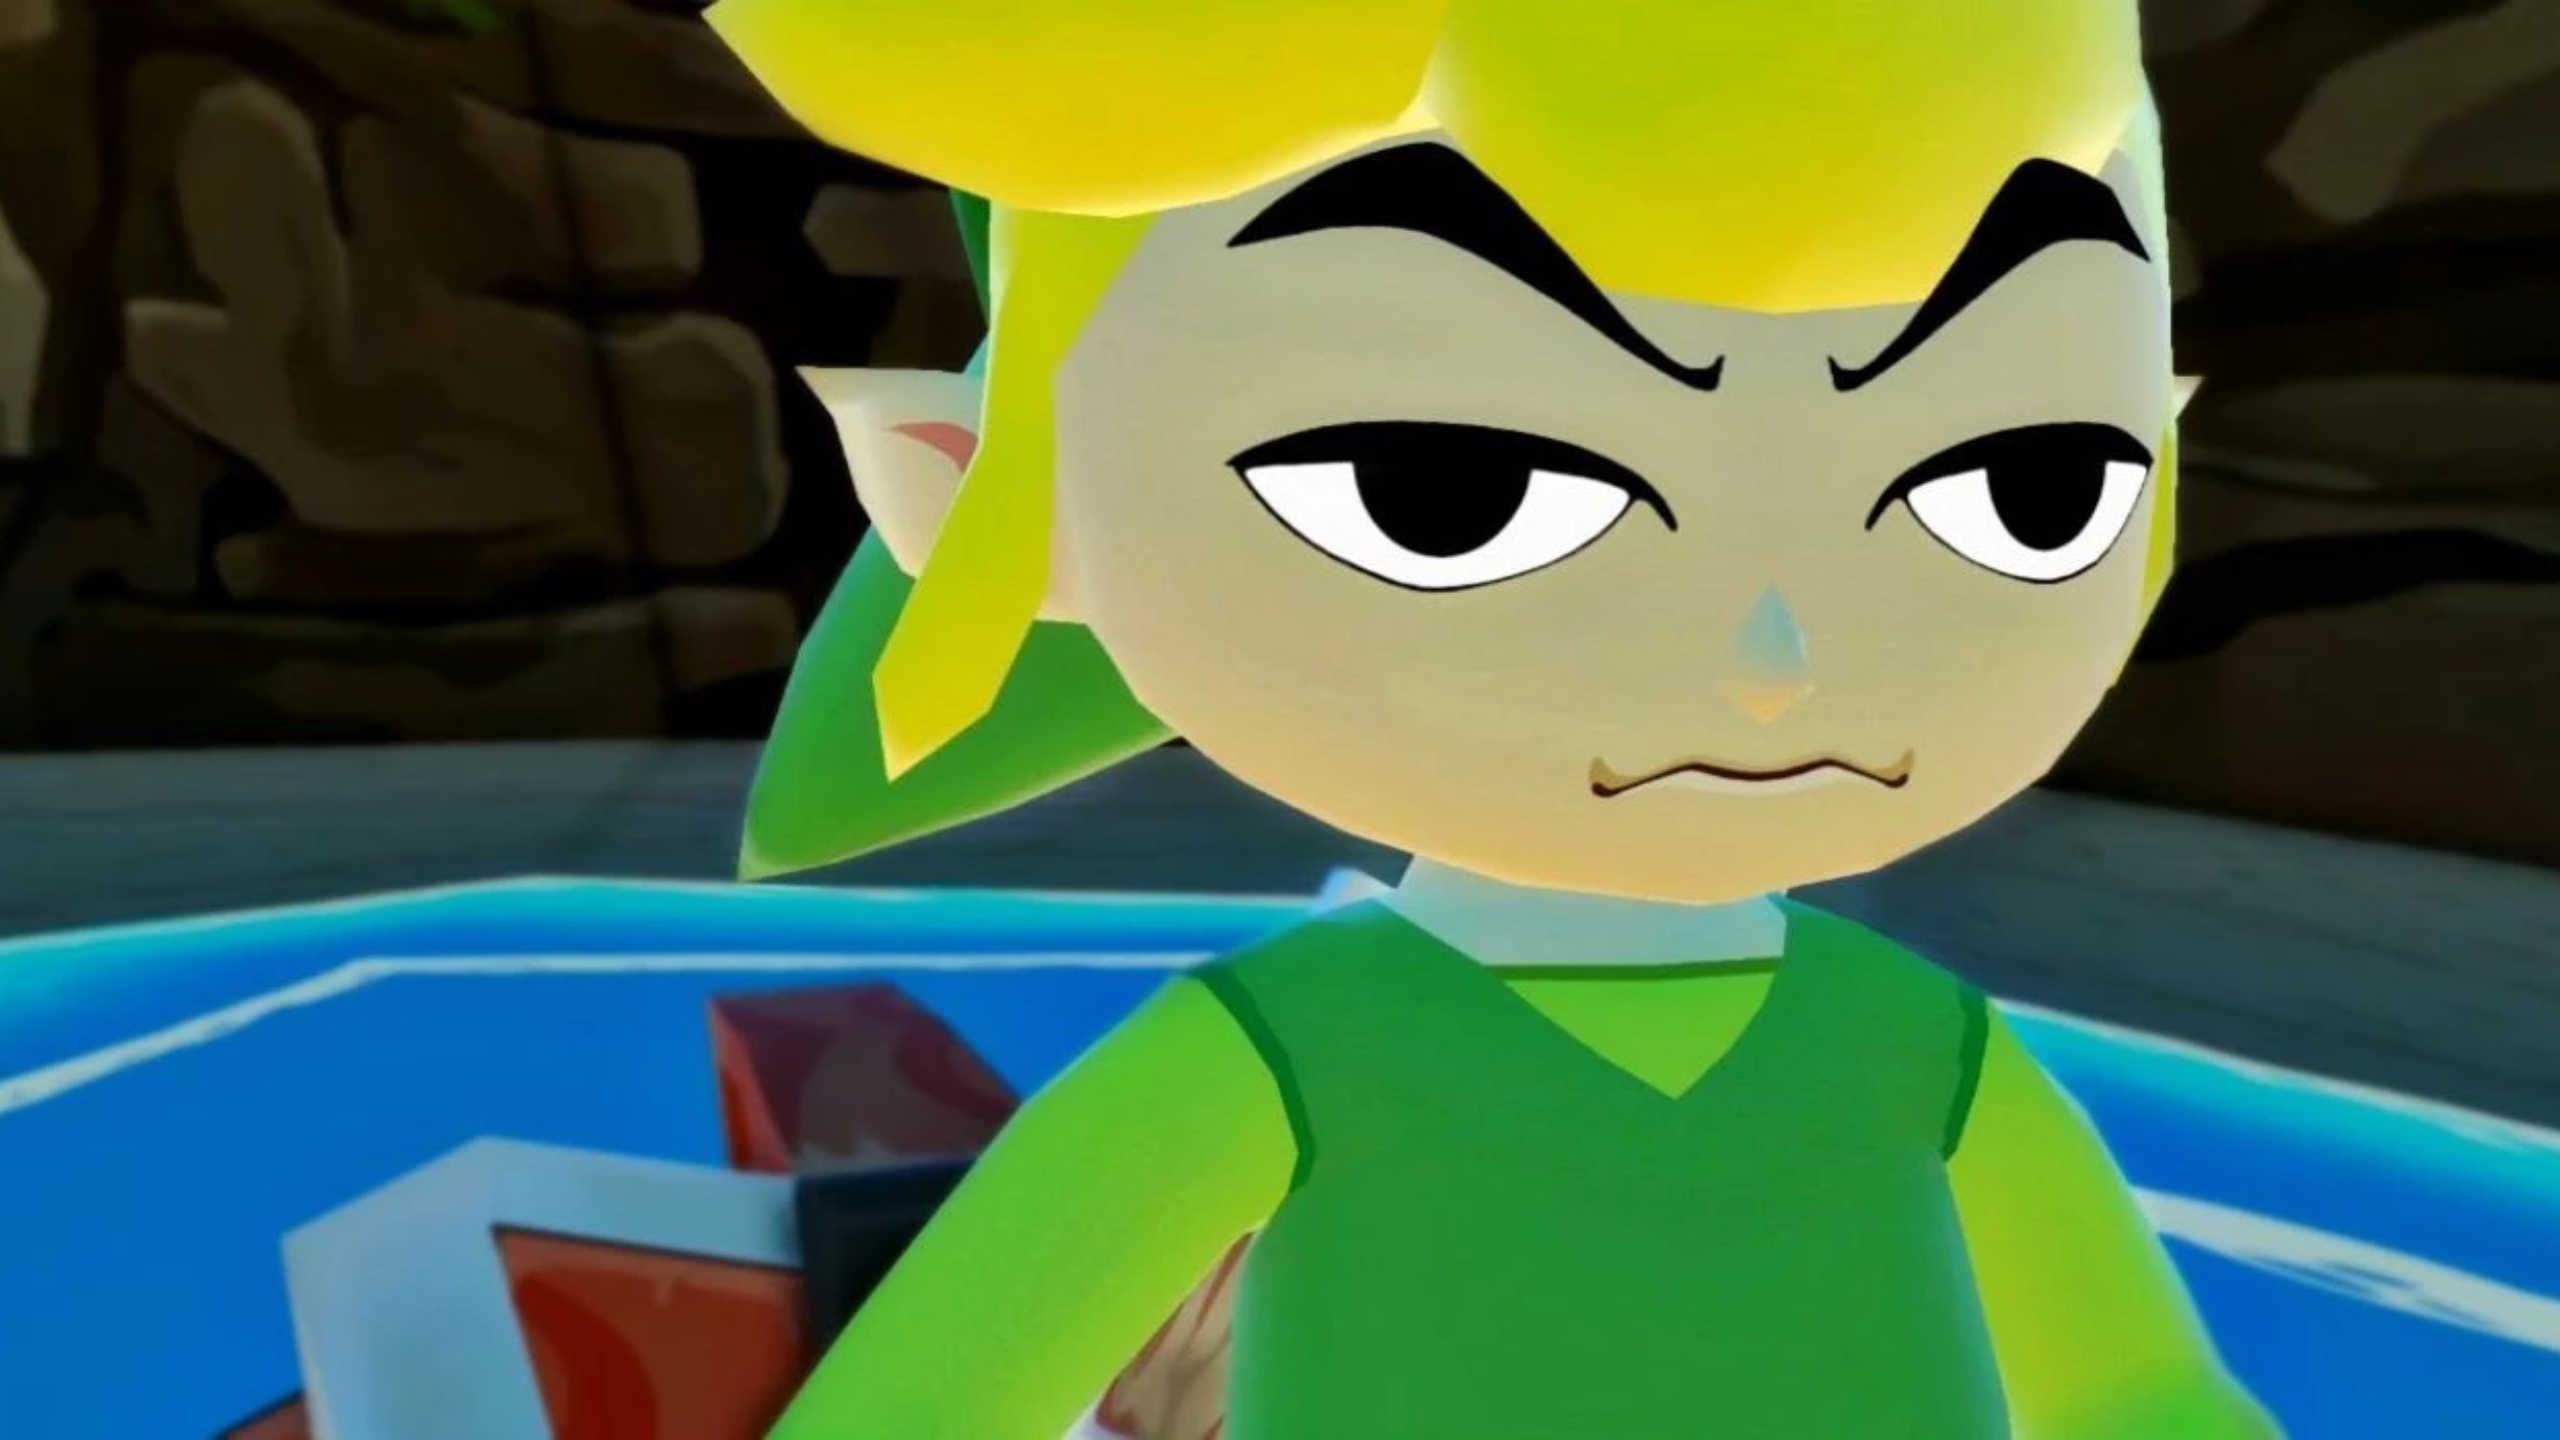 Wind Waker mod adds over 10,000 lines of dialogue, turns game into comedic masterpiece